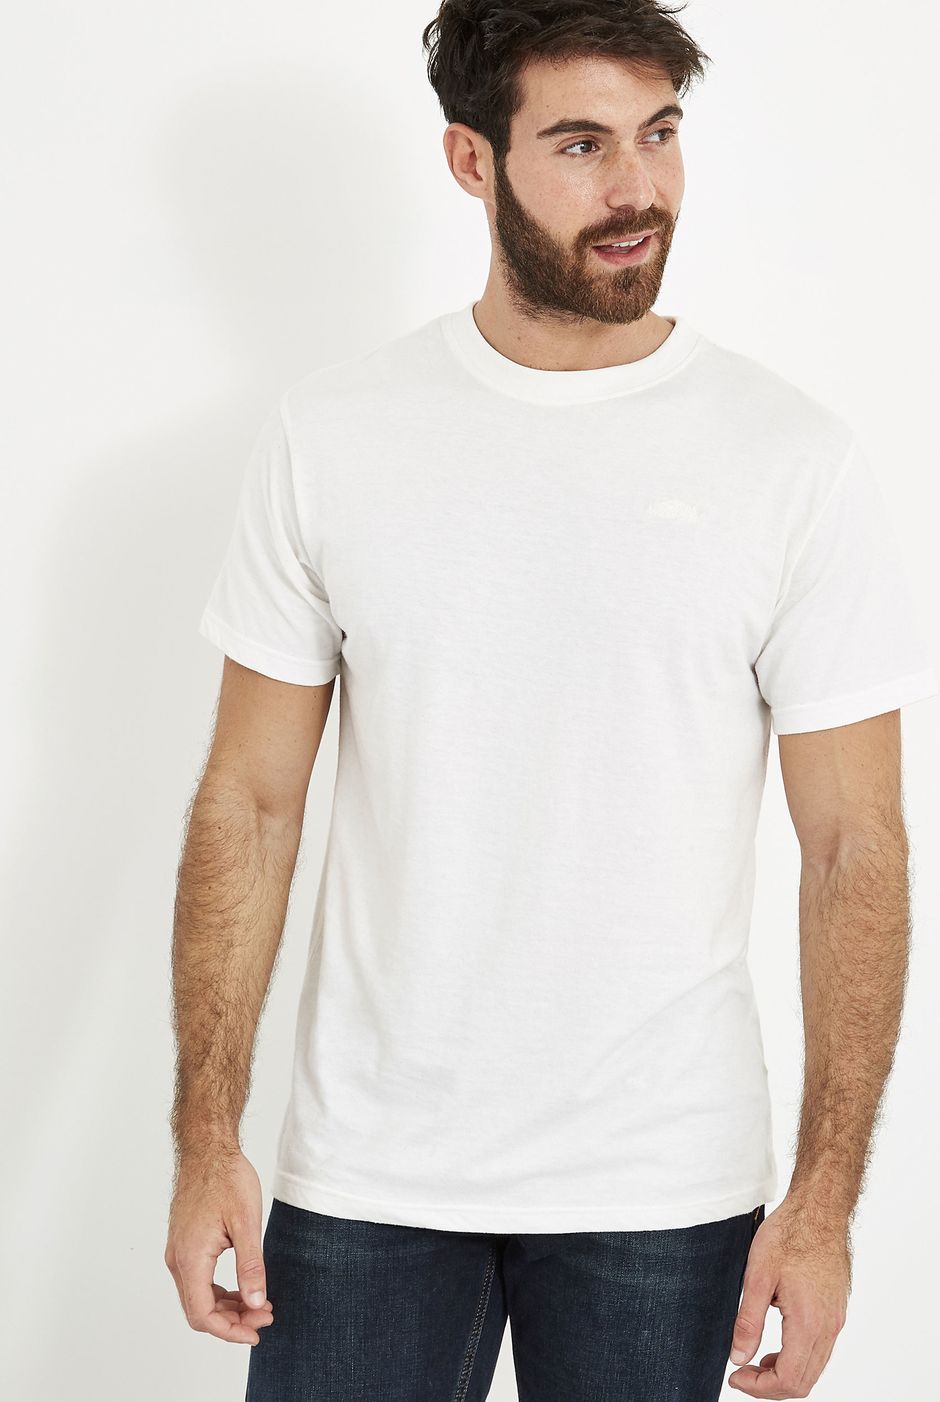 Fished T-Shirt Dusty White Marl